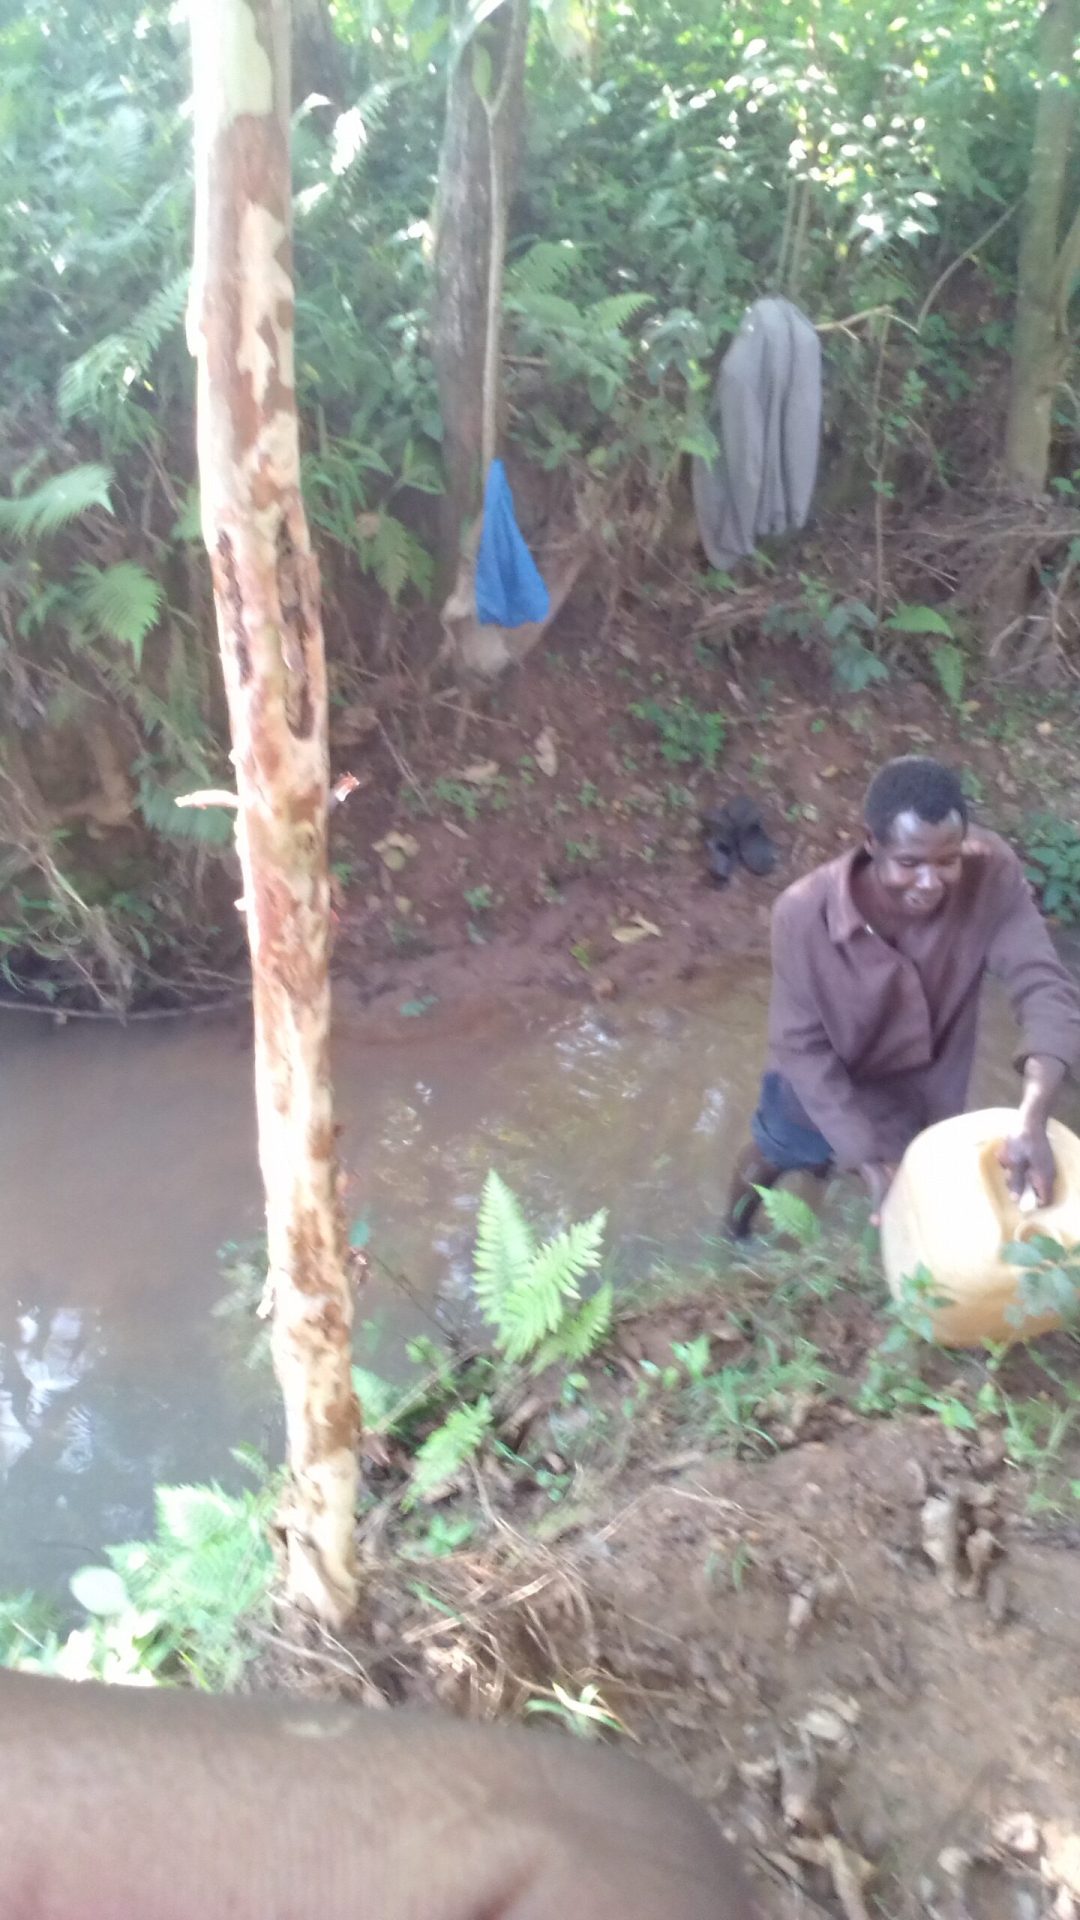 EXCLUSIVE: Photos And Video Of Samuel Tanui, A Man Who Voluntarily Fetches Water For Villagers